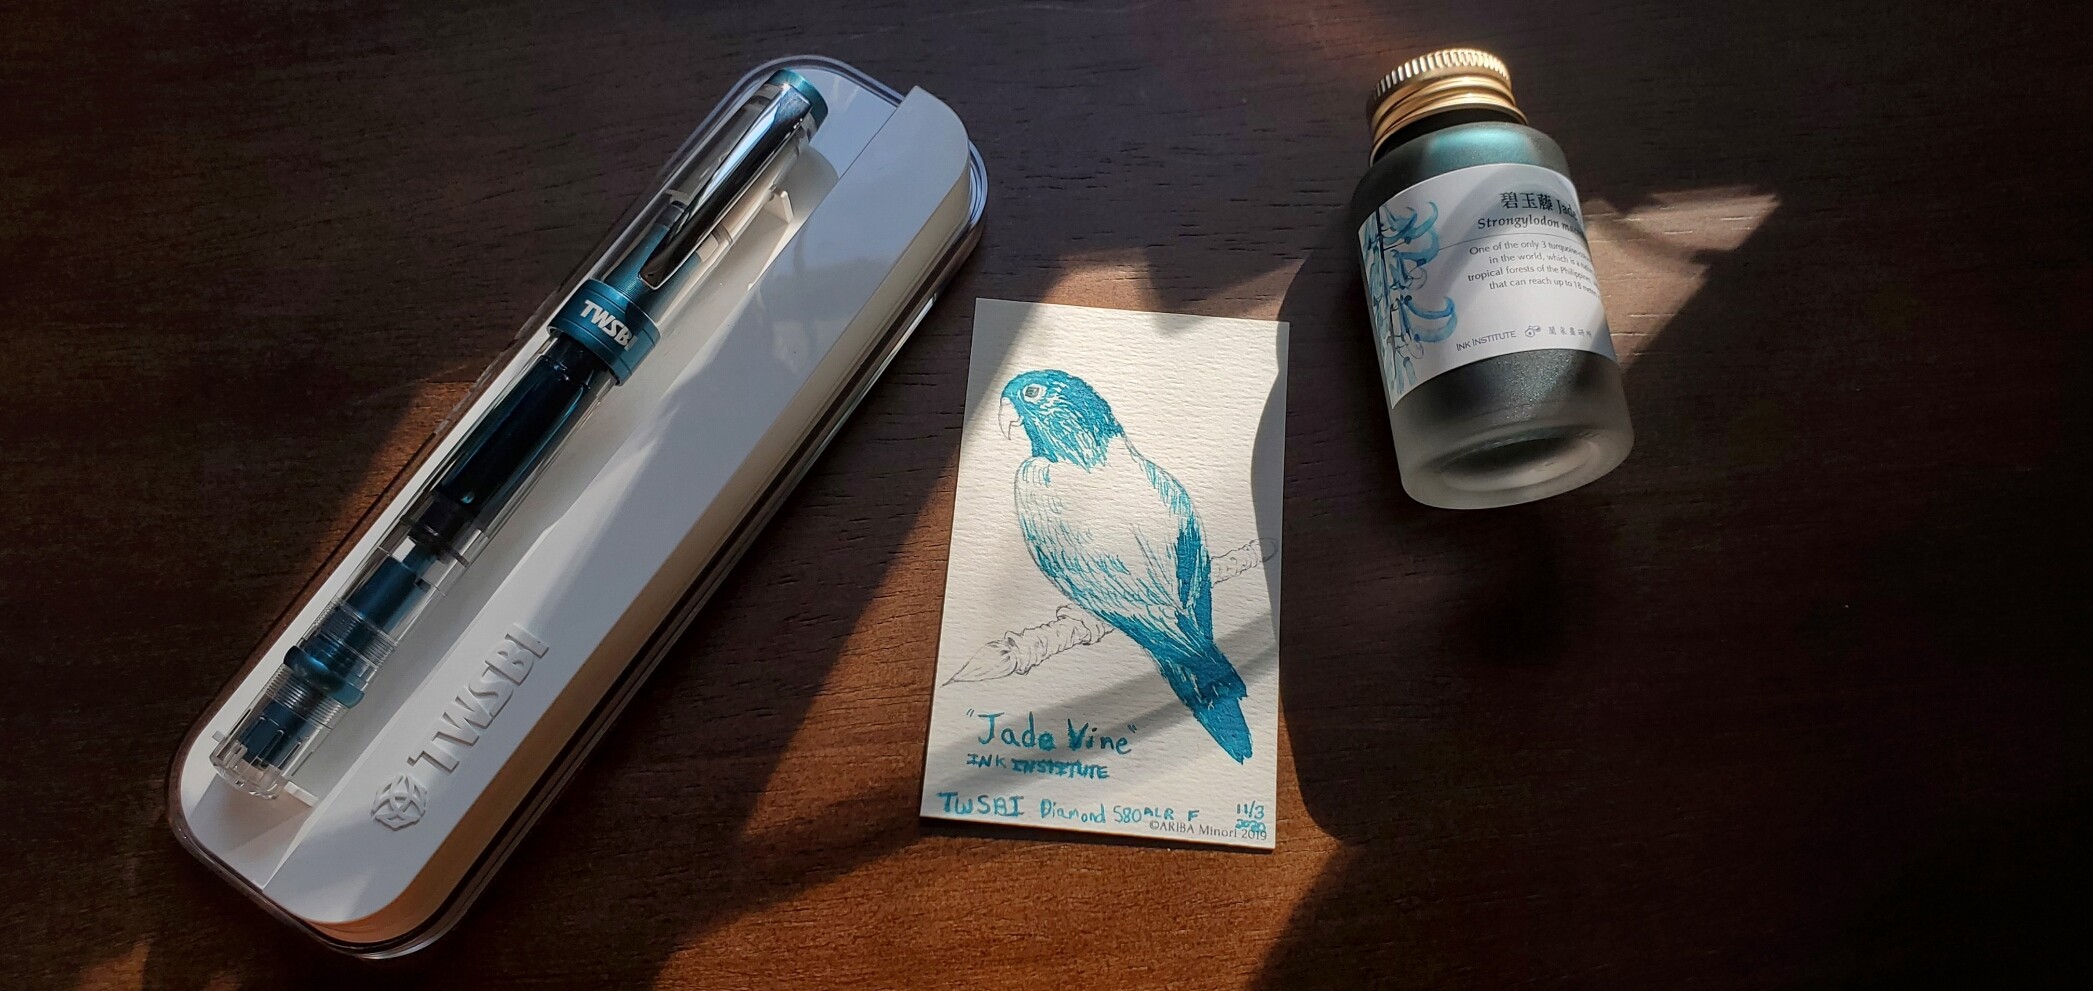 TWSBI Diamond 580 ALR in Prussian Blue with Ink Institute Jade Vine ink and a swatch card with a bird outline colored in and labeled with the Jade Vine ink.